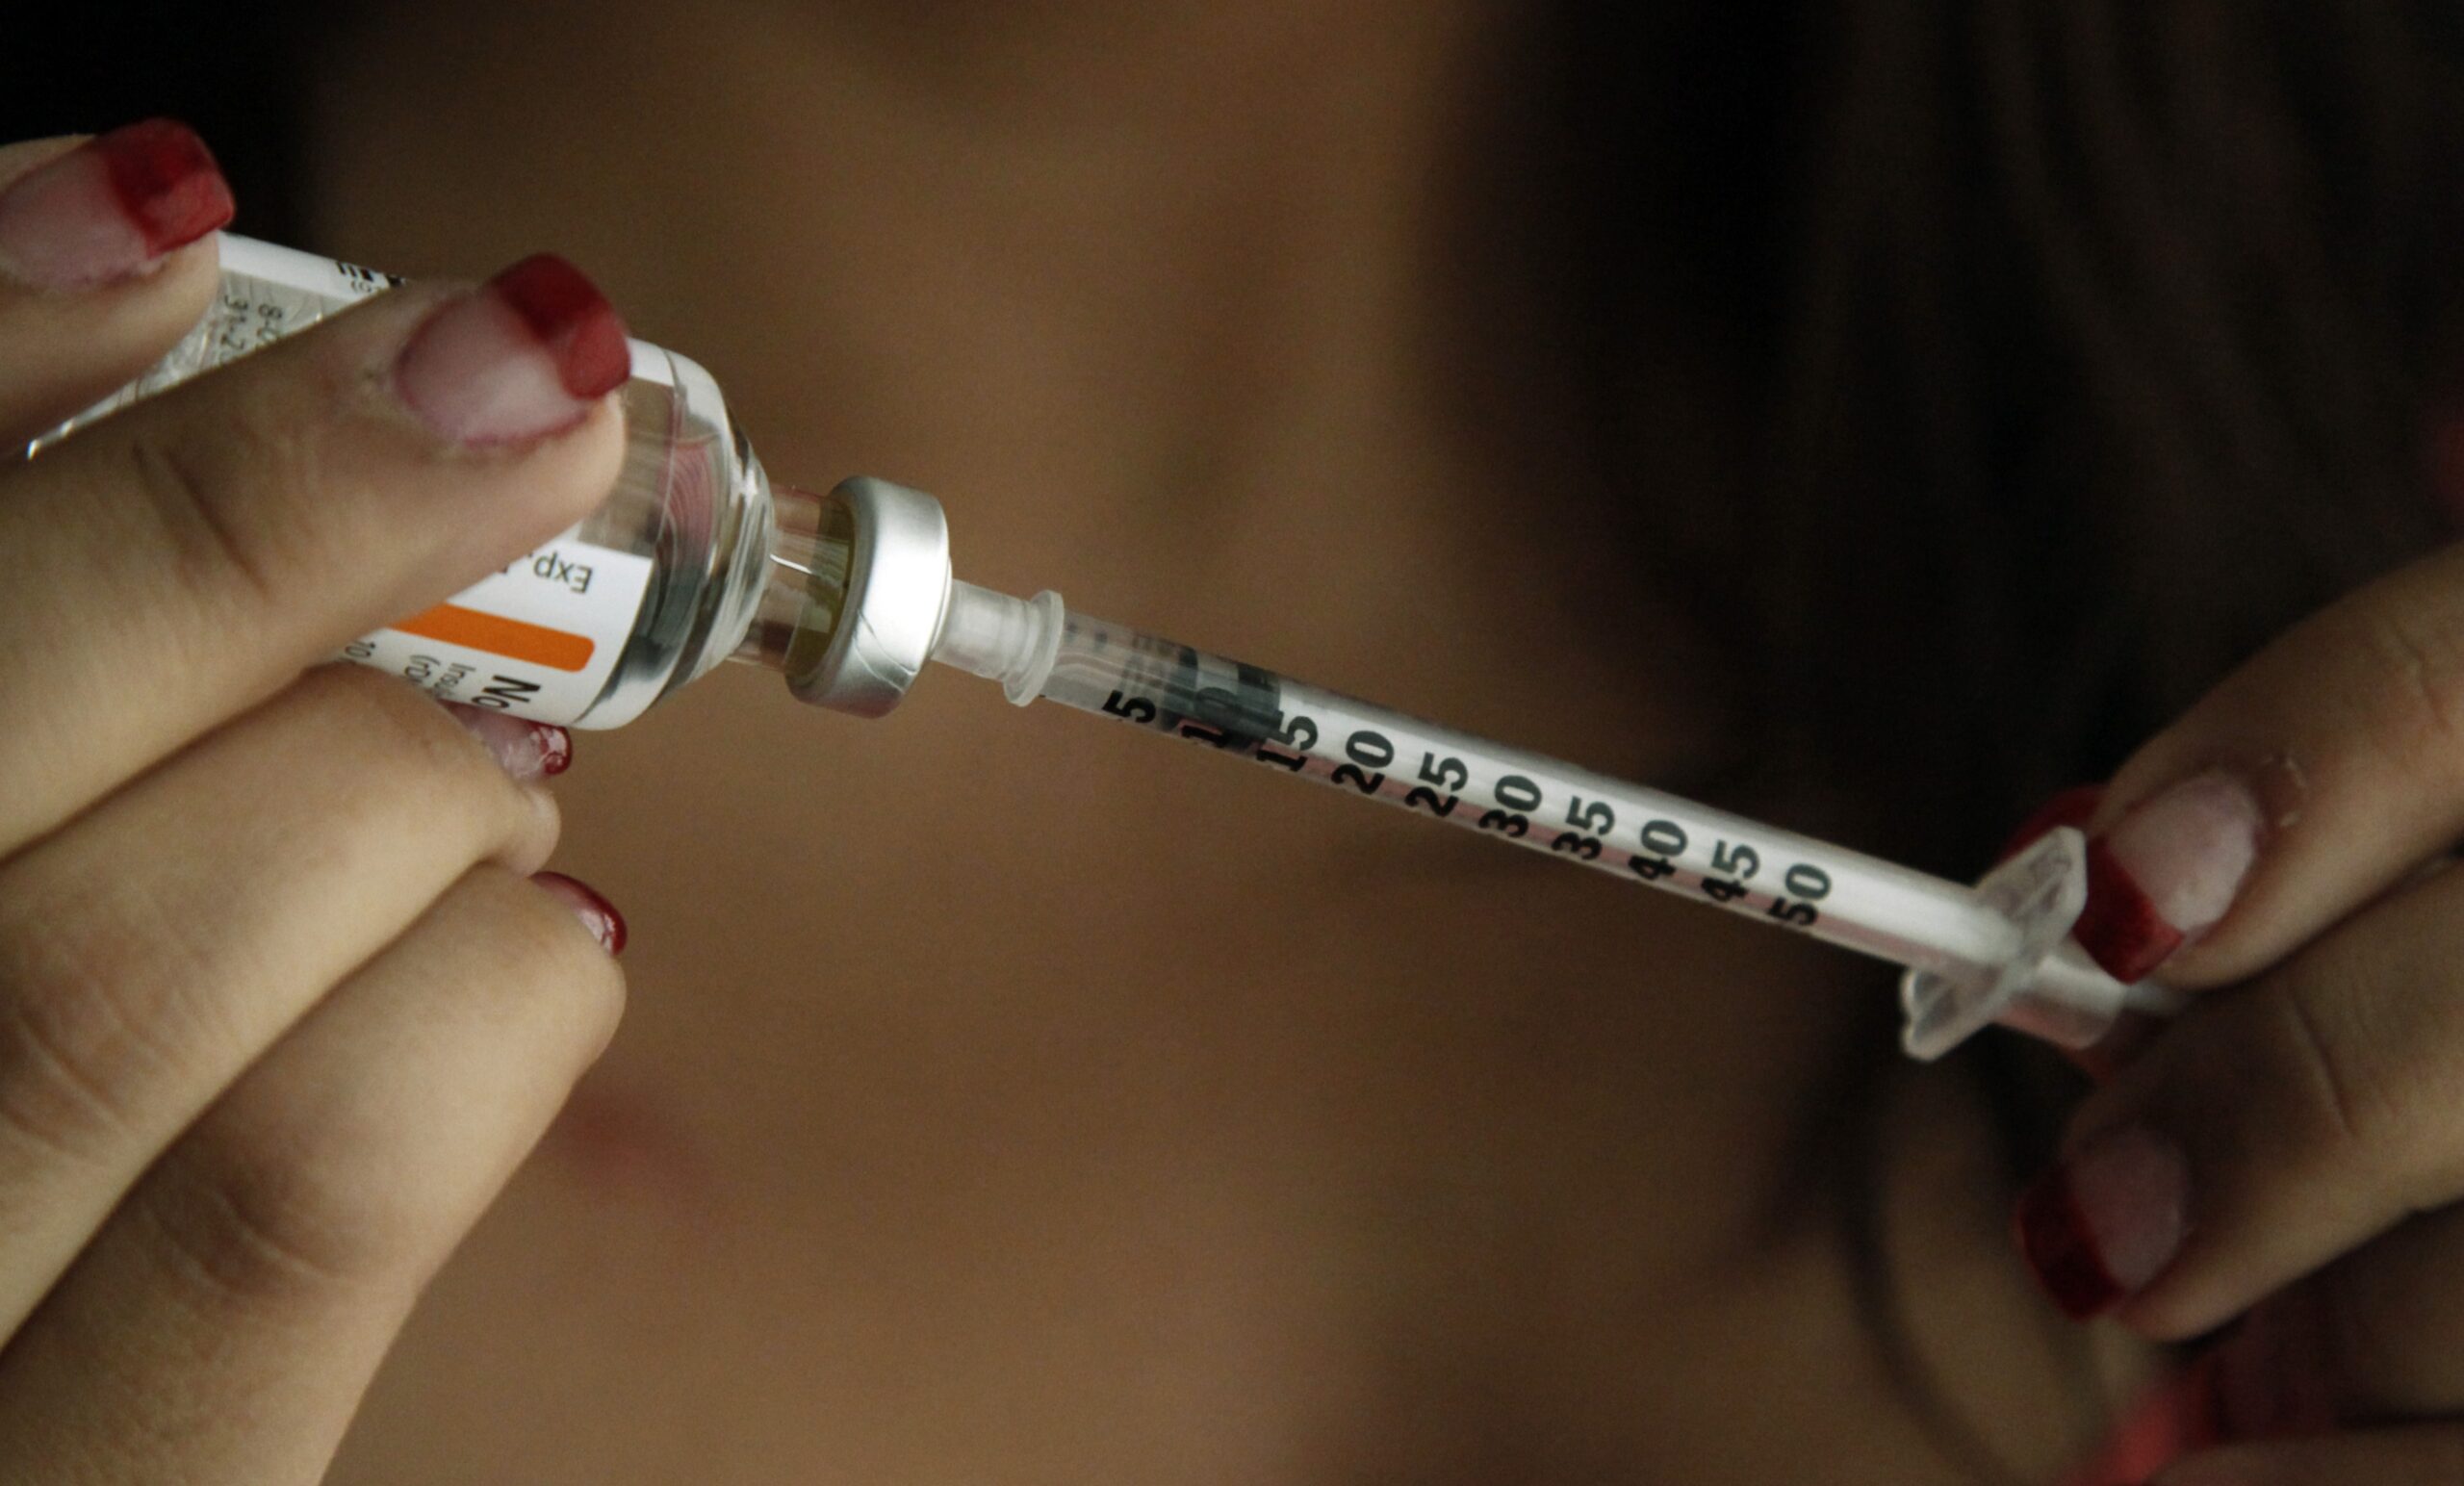 insulin being put into a needle